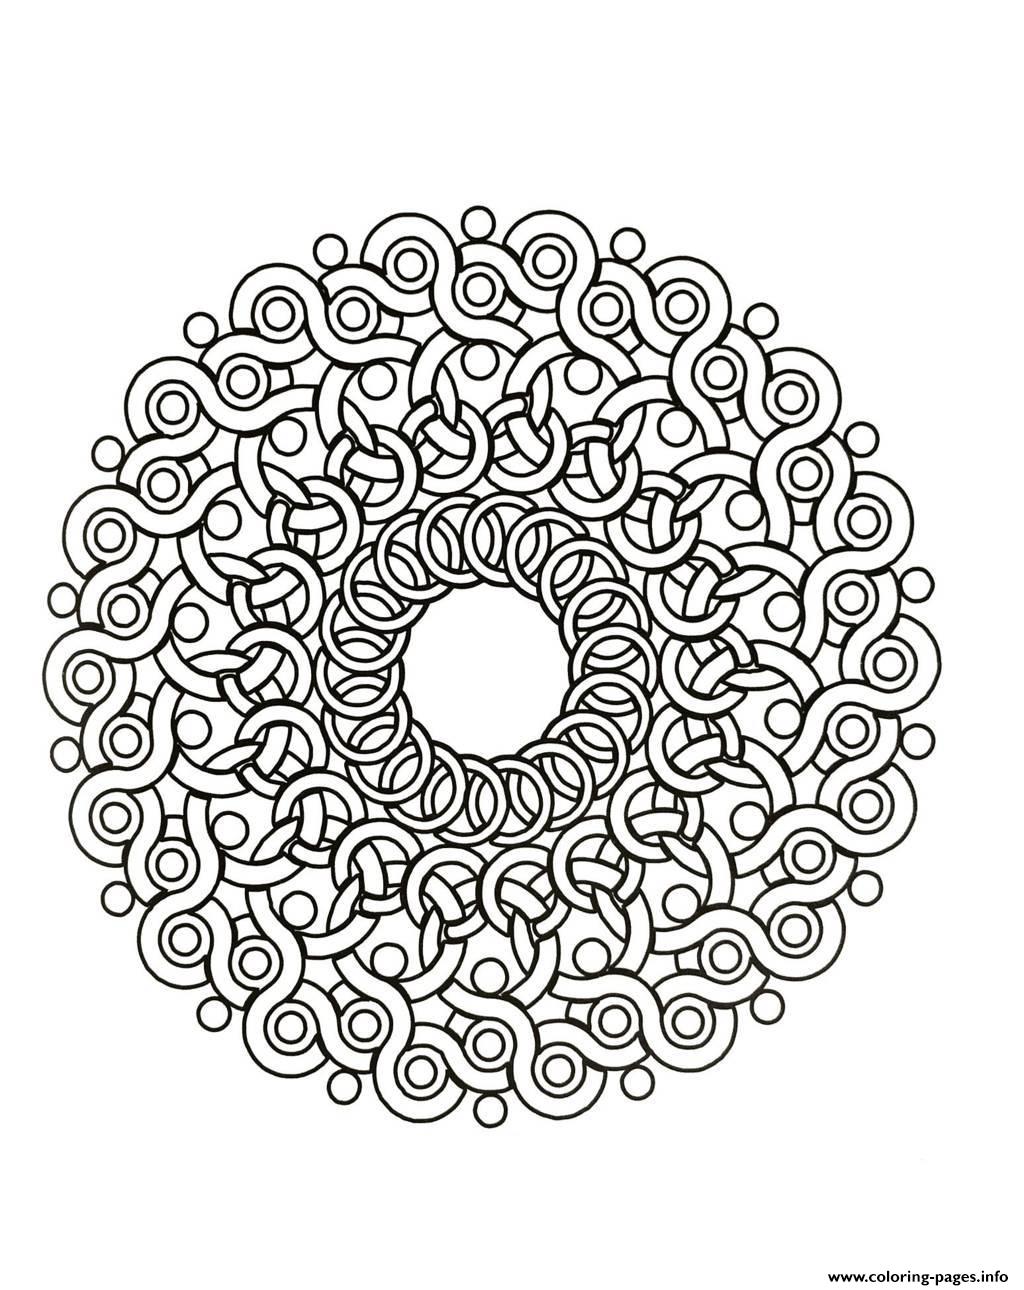 Mandalas To Download For Free 30  coloring